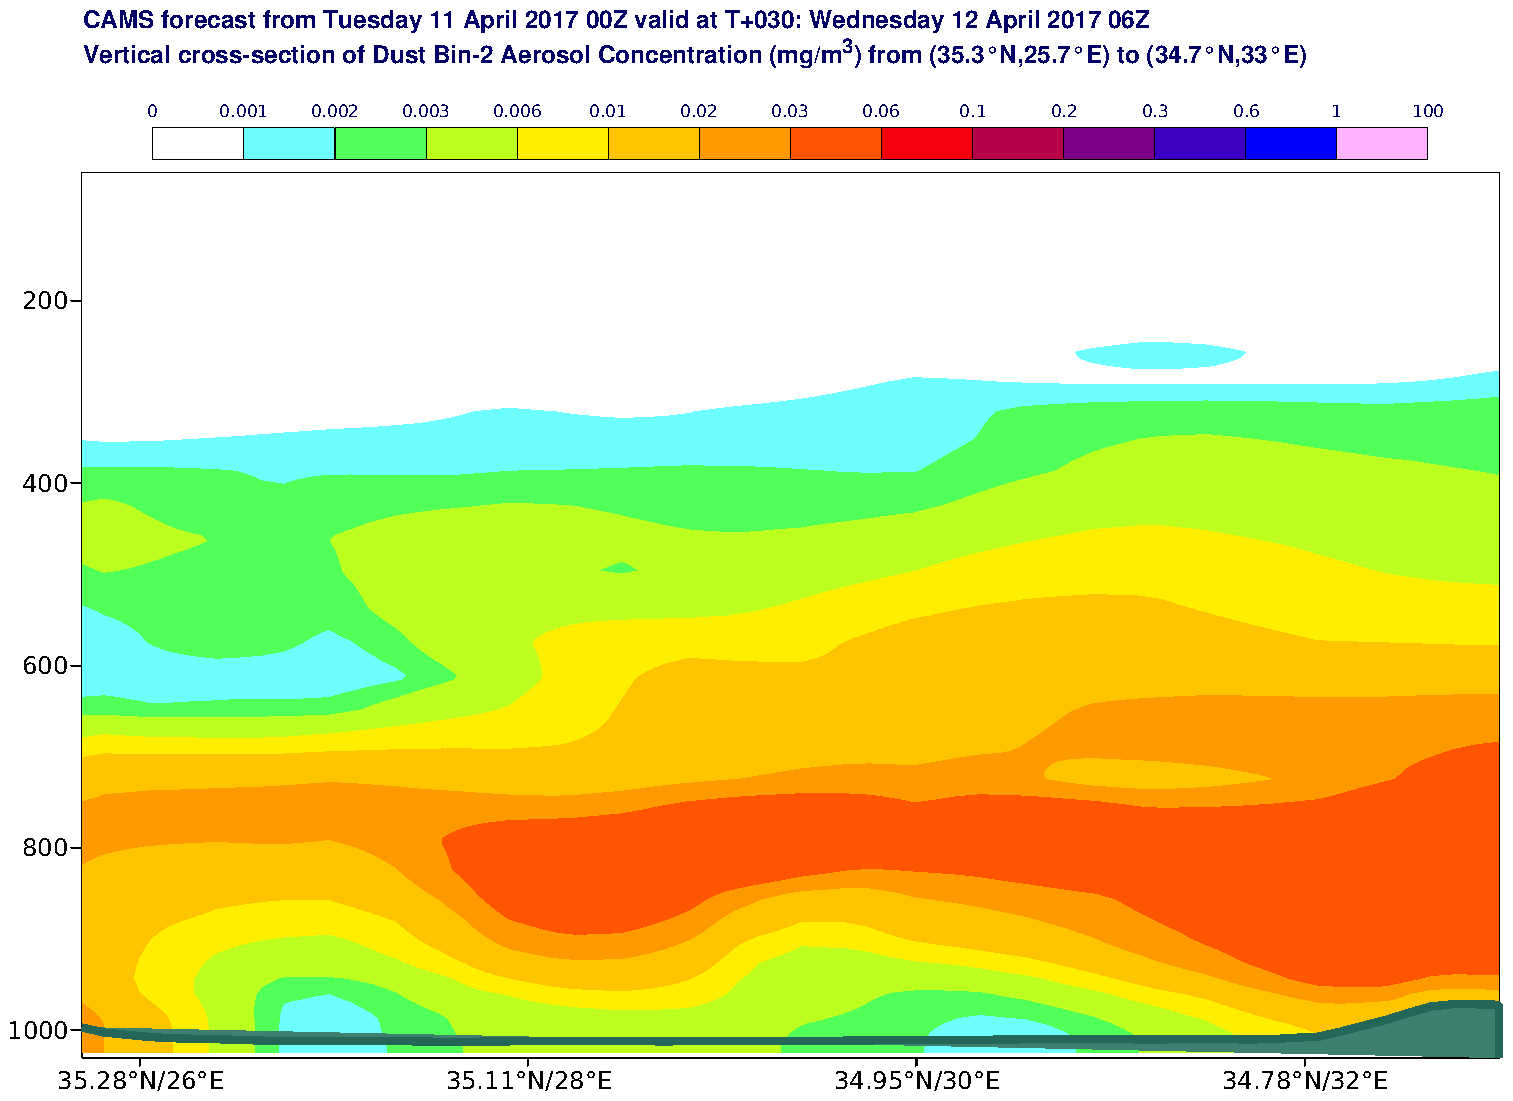 Vertical cross-section of Dust Bin-2 Aerosol Concentration (mg/m3) valid at T30 - 2017-04-12 06:00